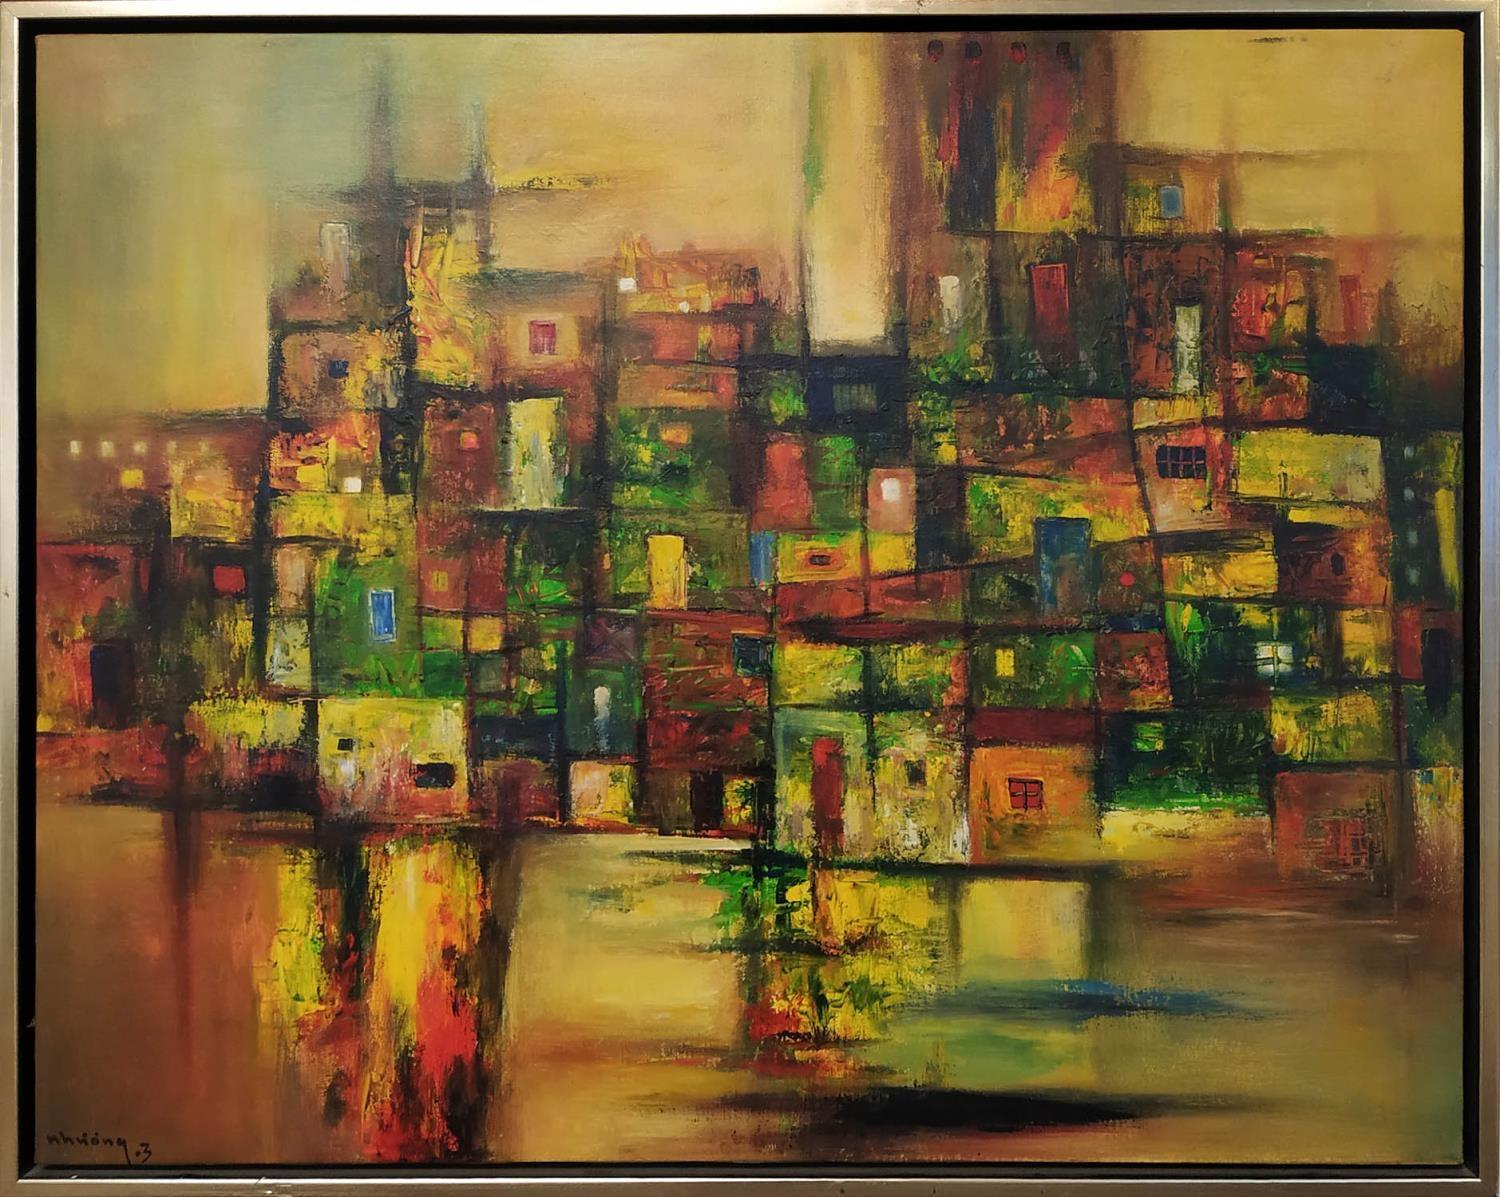 HUONG (Vietnam 20th/21st century) 'Town in Abstract form', oil on canvas, 69cm x 86cm, signed and